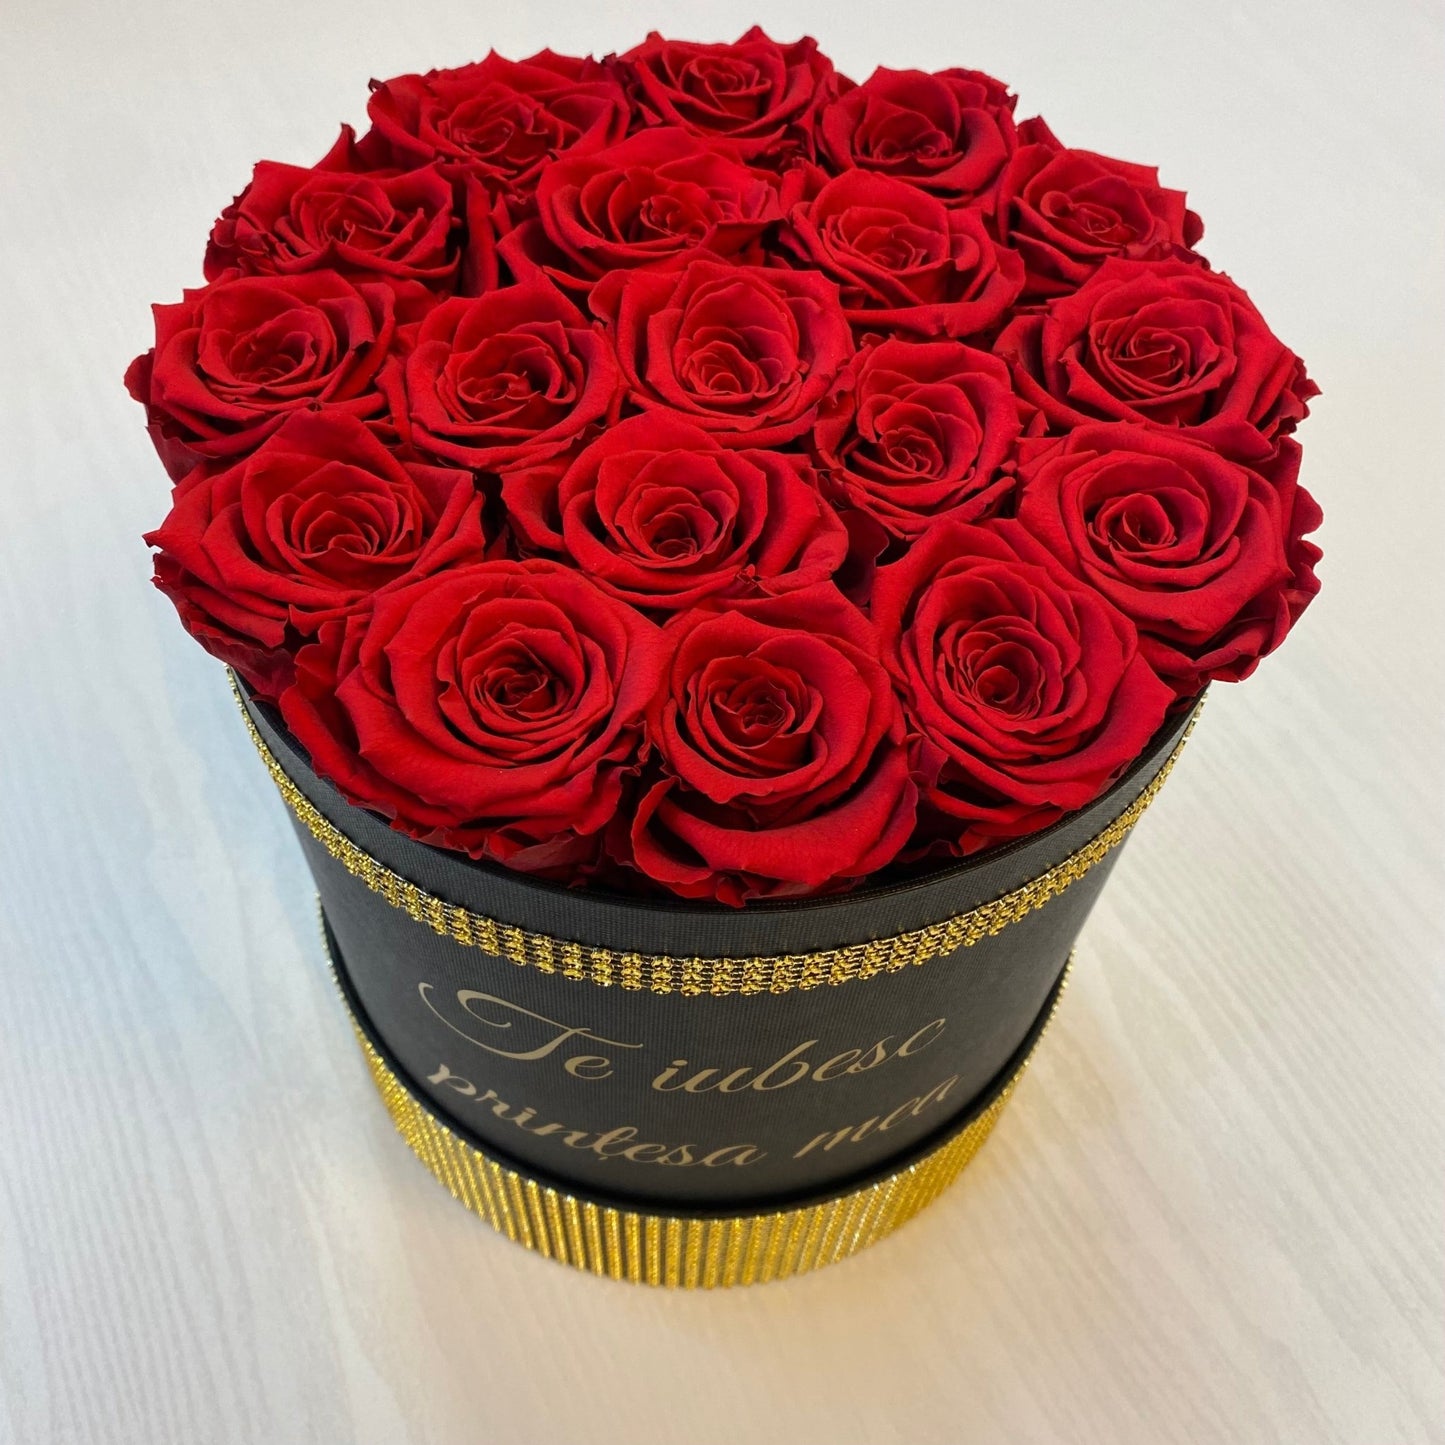 Infinity Rose Box - Enchanting Large Rose Box - Red Infinity Roses - One Year Roses - Gold Diamanté Box - Boxed Roses